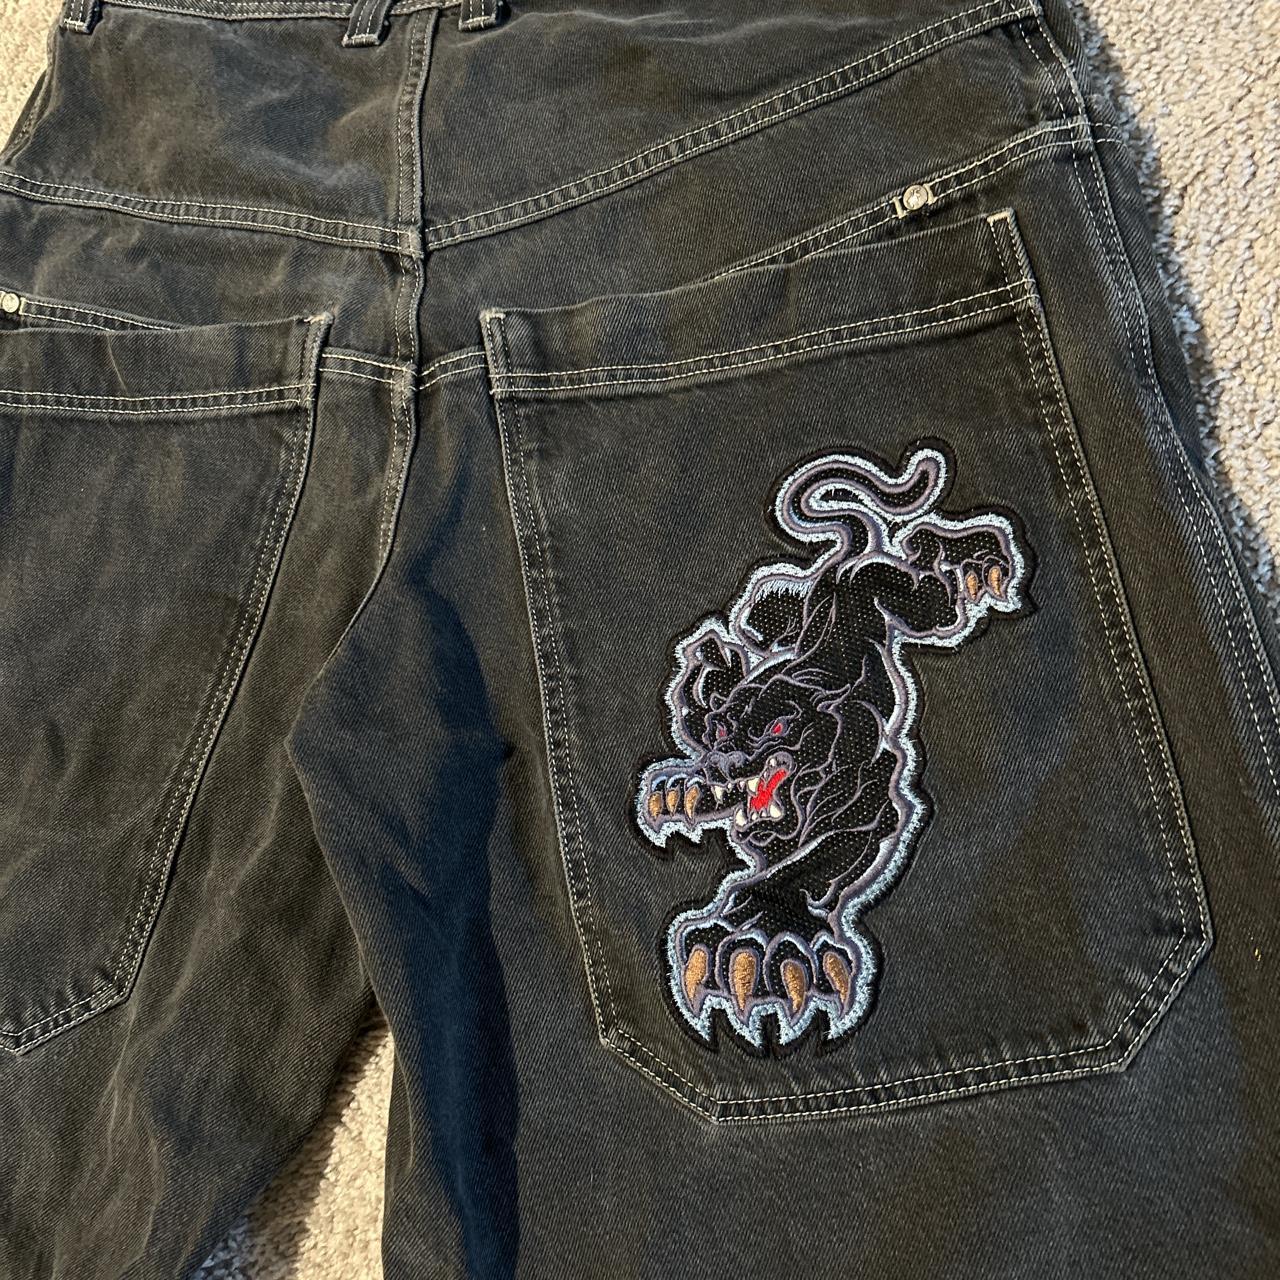 panther jnco shorts. perfect condition and sick as... - Depop